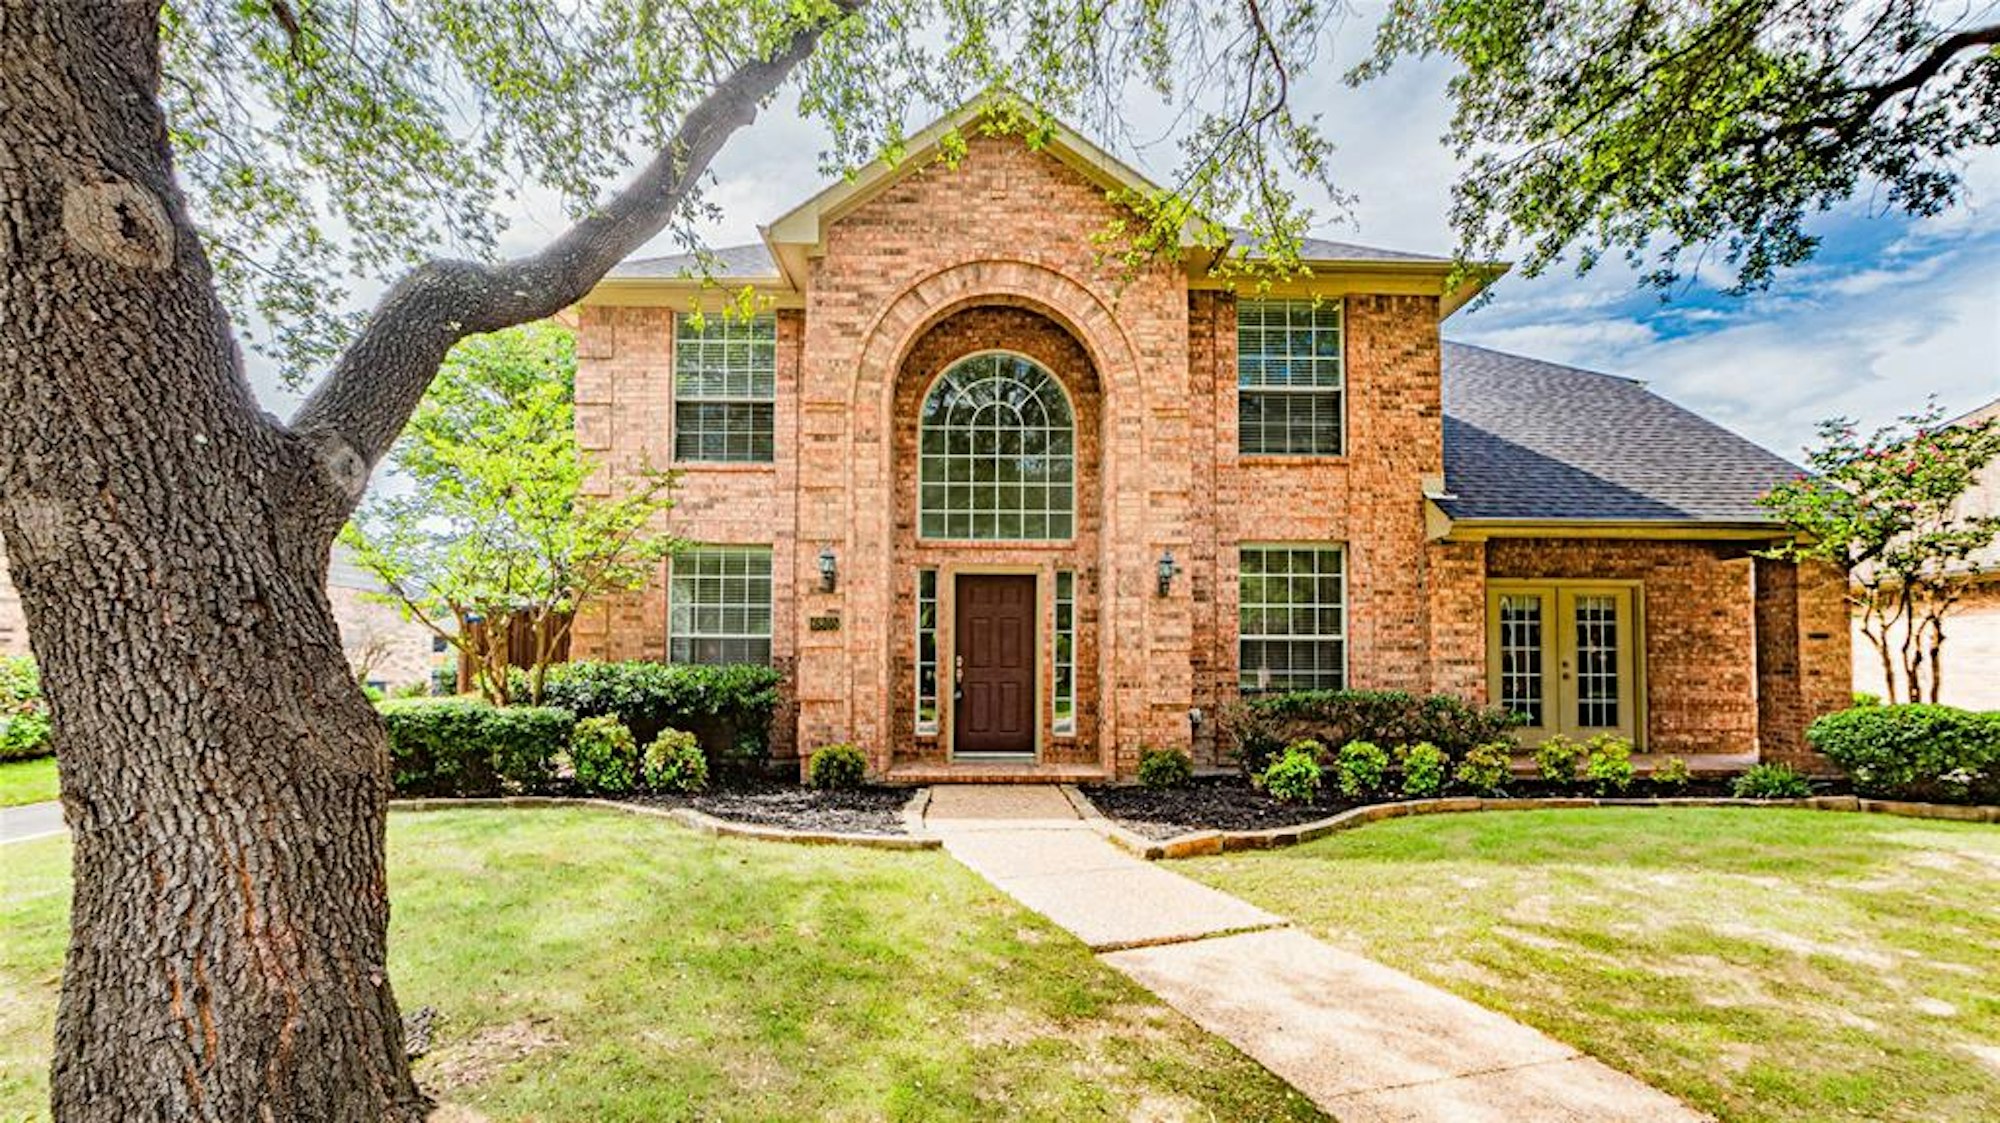 Photo 1 of 28 - 6805 Colonnade Dr, Plano, TX 75024